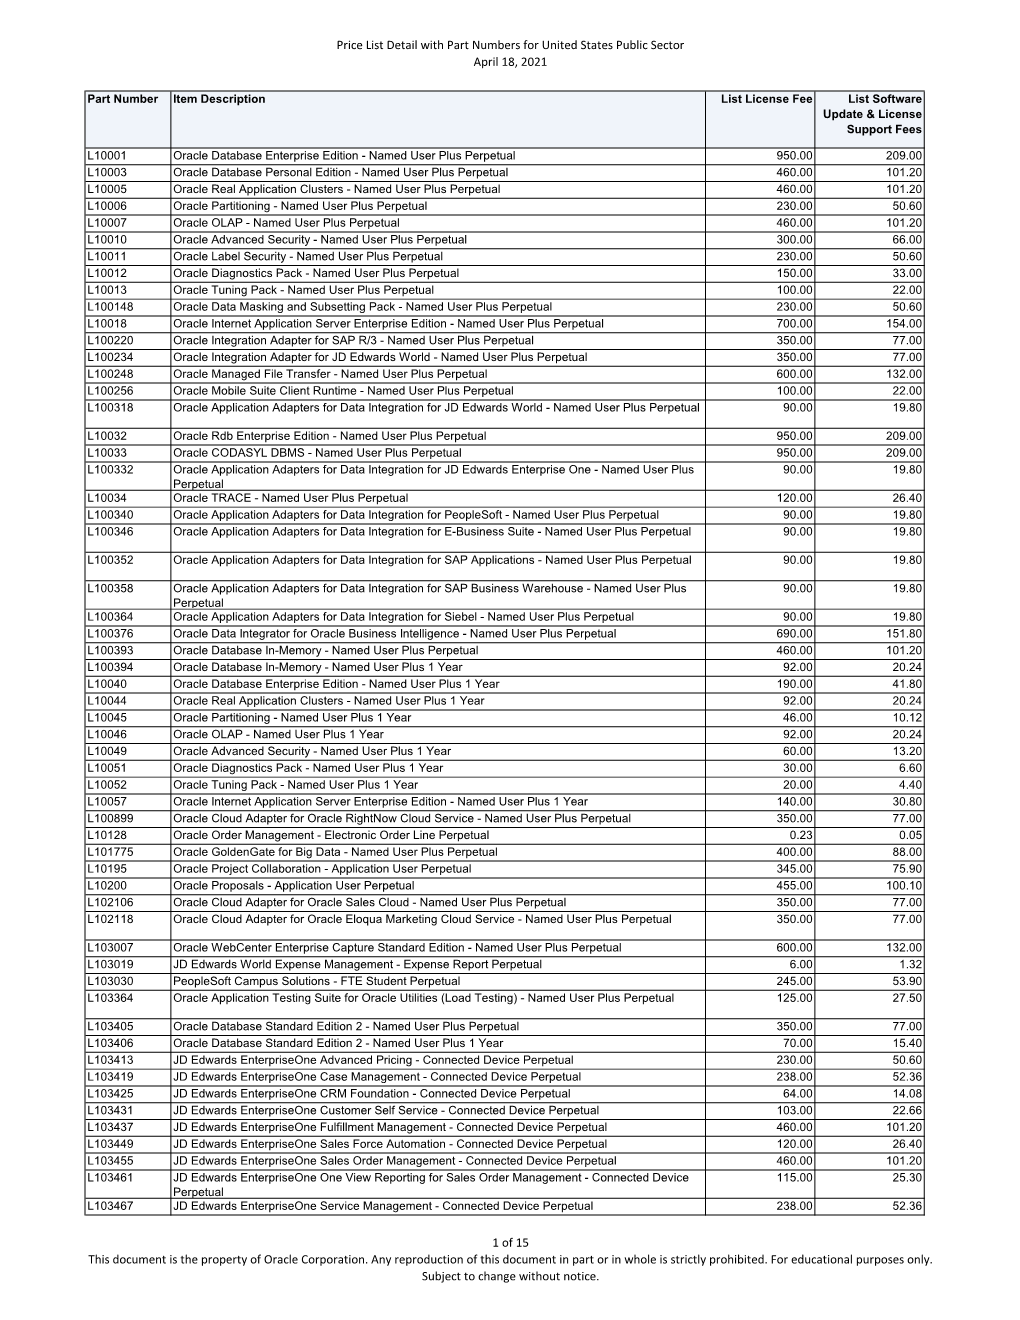 Price List Detail with Part Numbers for United States Public Sector April 18, 2021